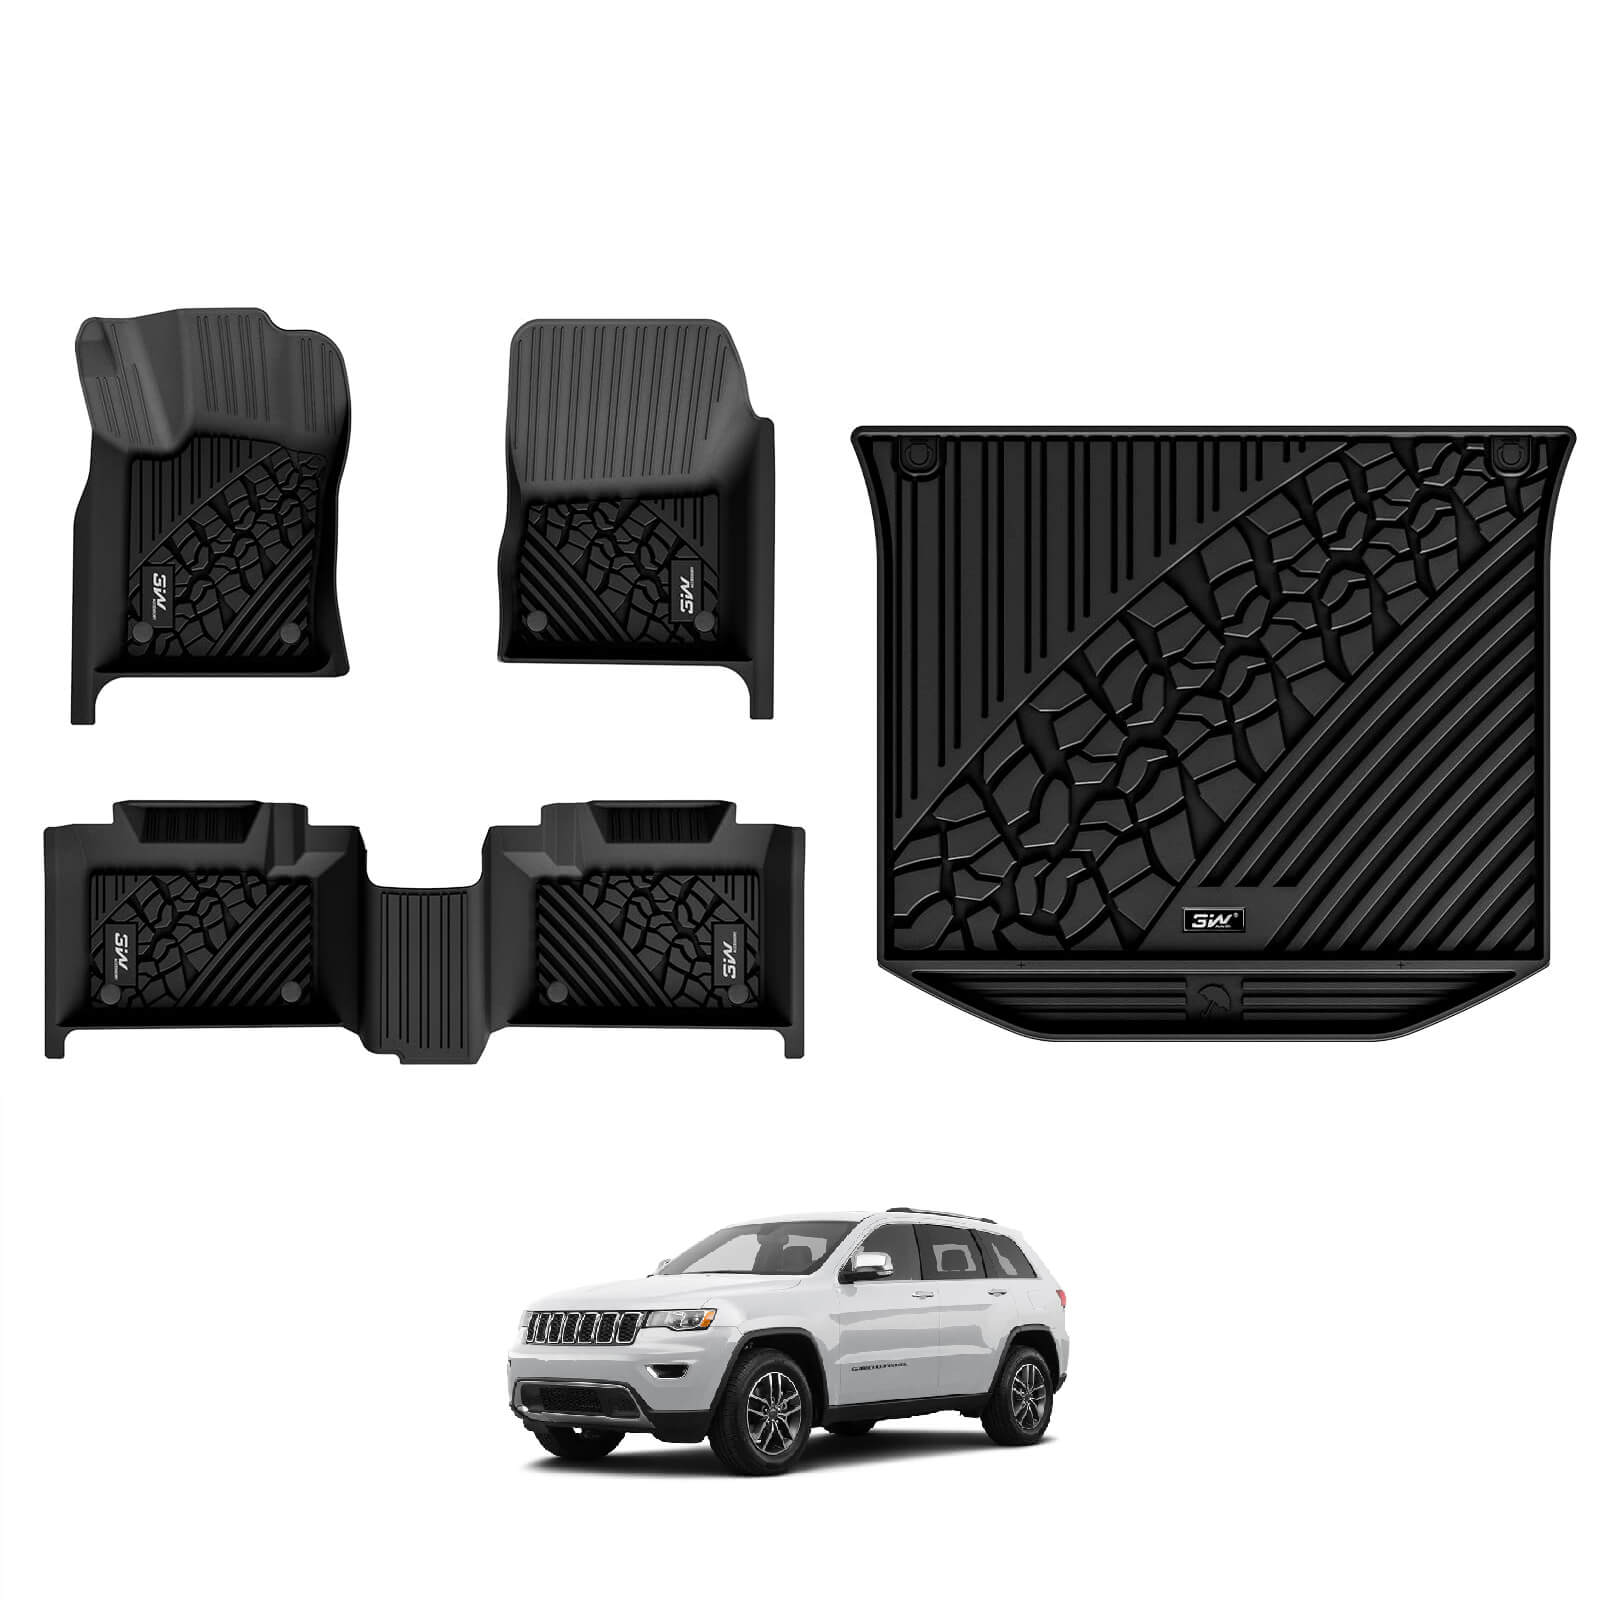 3W Floor Mats Jeep Grand Cherokee 2016-2021 / Grand Cherokee WK 2022-2024 (Non L) Custom Cargo Liner TPE Material & All-Weather Protection Vehicles & Parts 3Wliners 2016-2021 Grand Cherokee 2016-2021 1st&2nd Row Mats+Trunk Mat